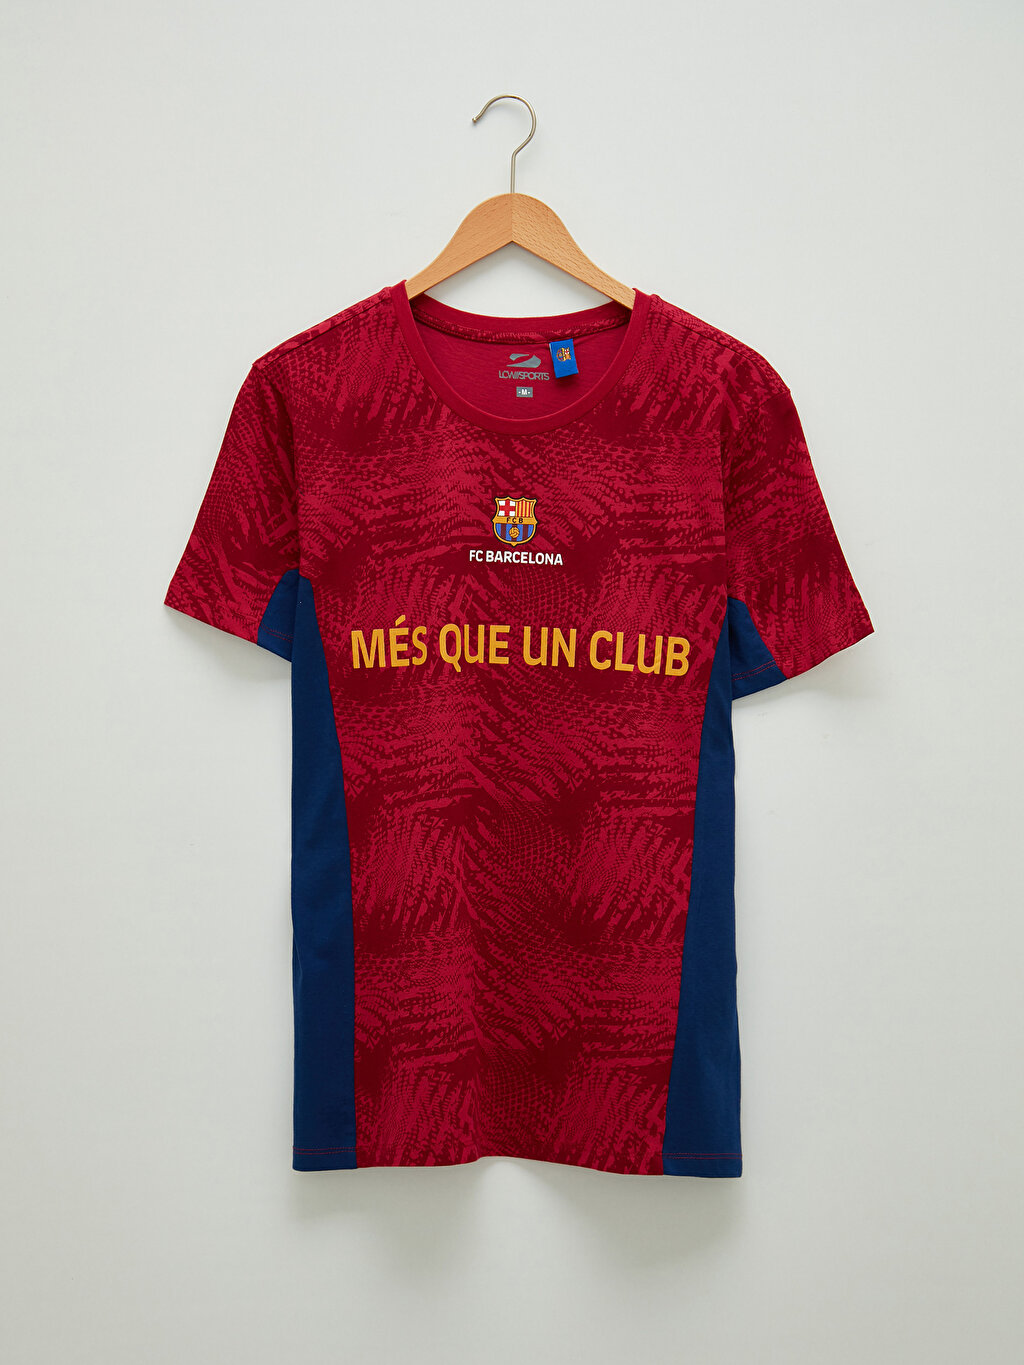 LCW SPORTS Crew Neck Short Sleeve Barcelona Printed Active Sports Combed  Cotton Men's Fan T-Shirt -S1I853Z8-HMH - S1I853Z8-HMH - LC Waikiki